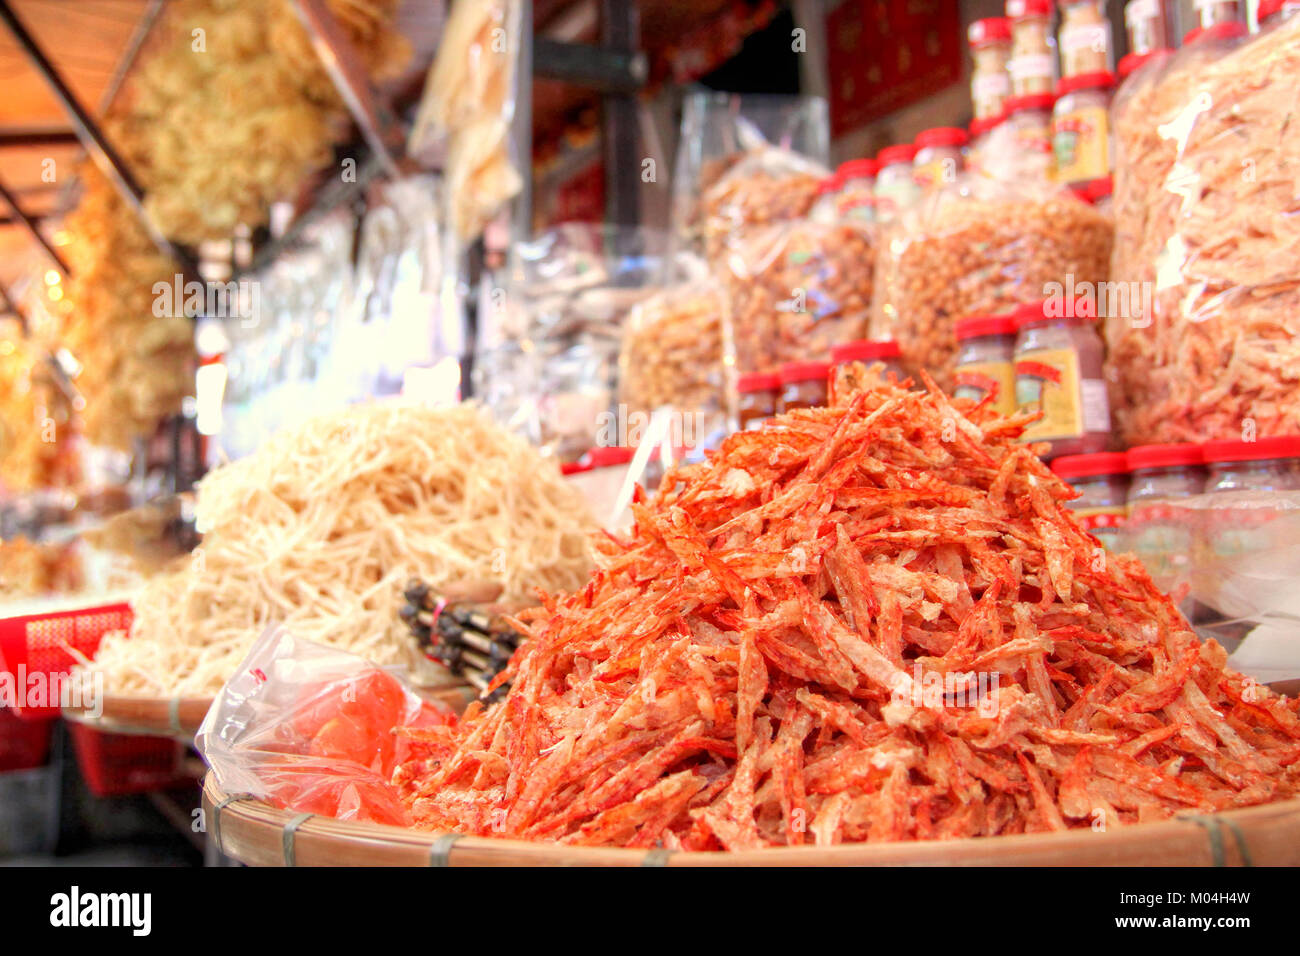 Focus on a pile of dried shrimp among other dehydrated seafood on sale at a store in Tai O, Hong Kong. Dried seafood delicacies are popular Chinese cu Stock Photo